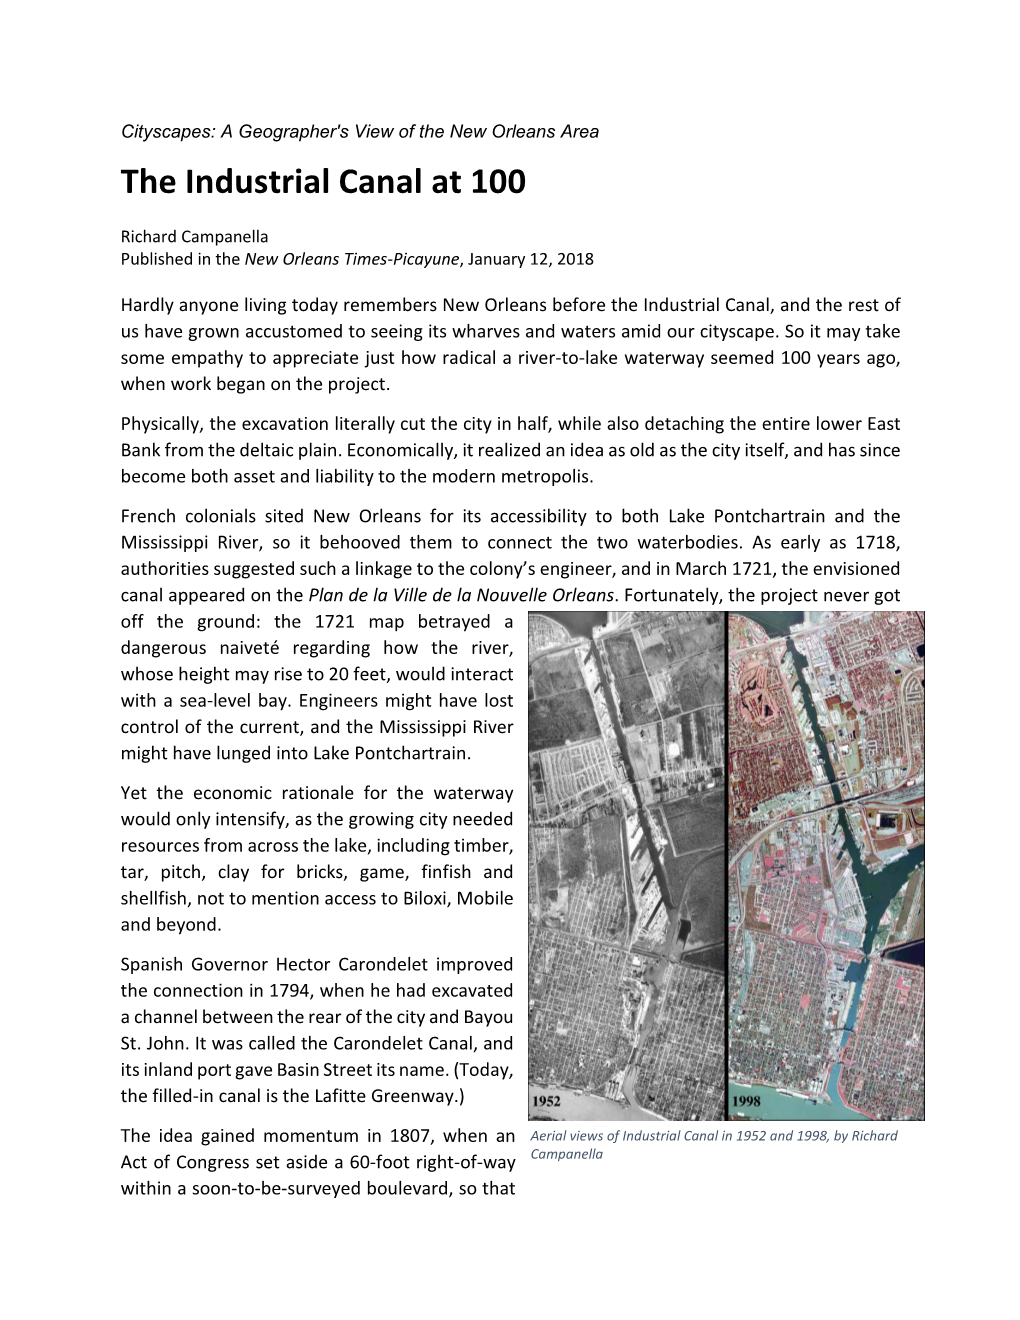 The Industrial Canal at 100